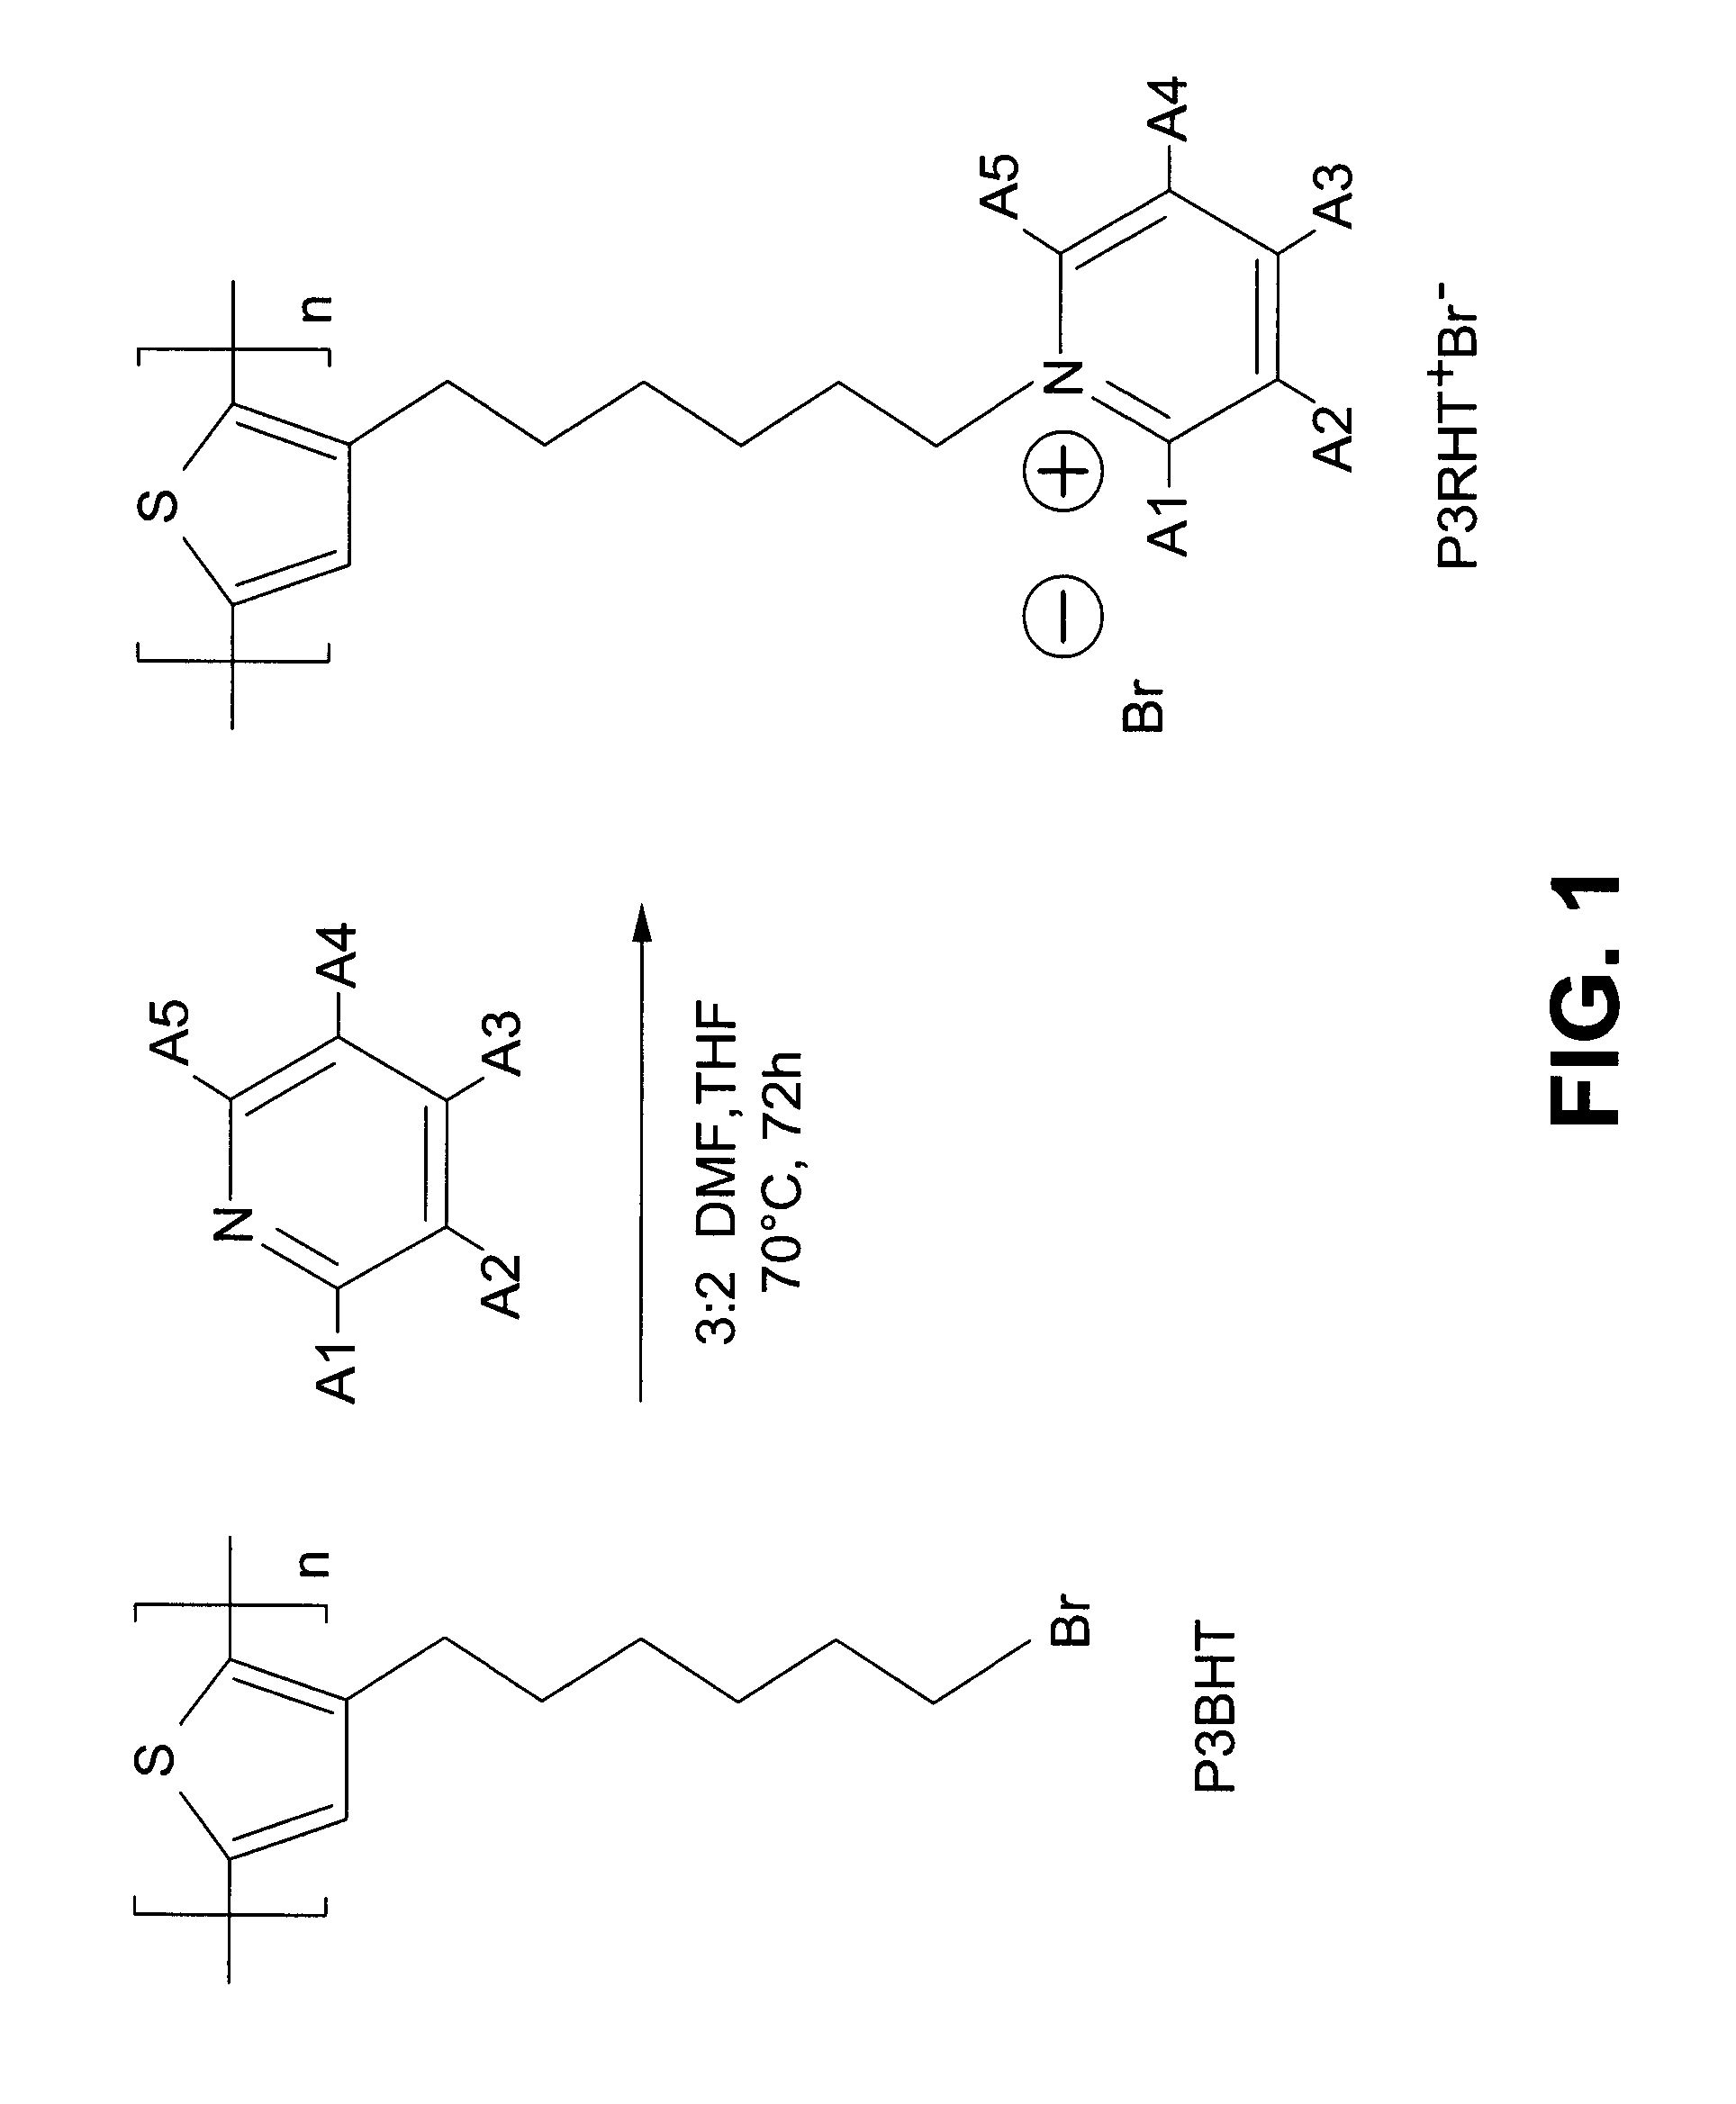 Functionalized Semiconducting Polymers For Use In Organic Photovoltaic Devices